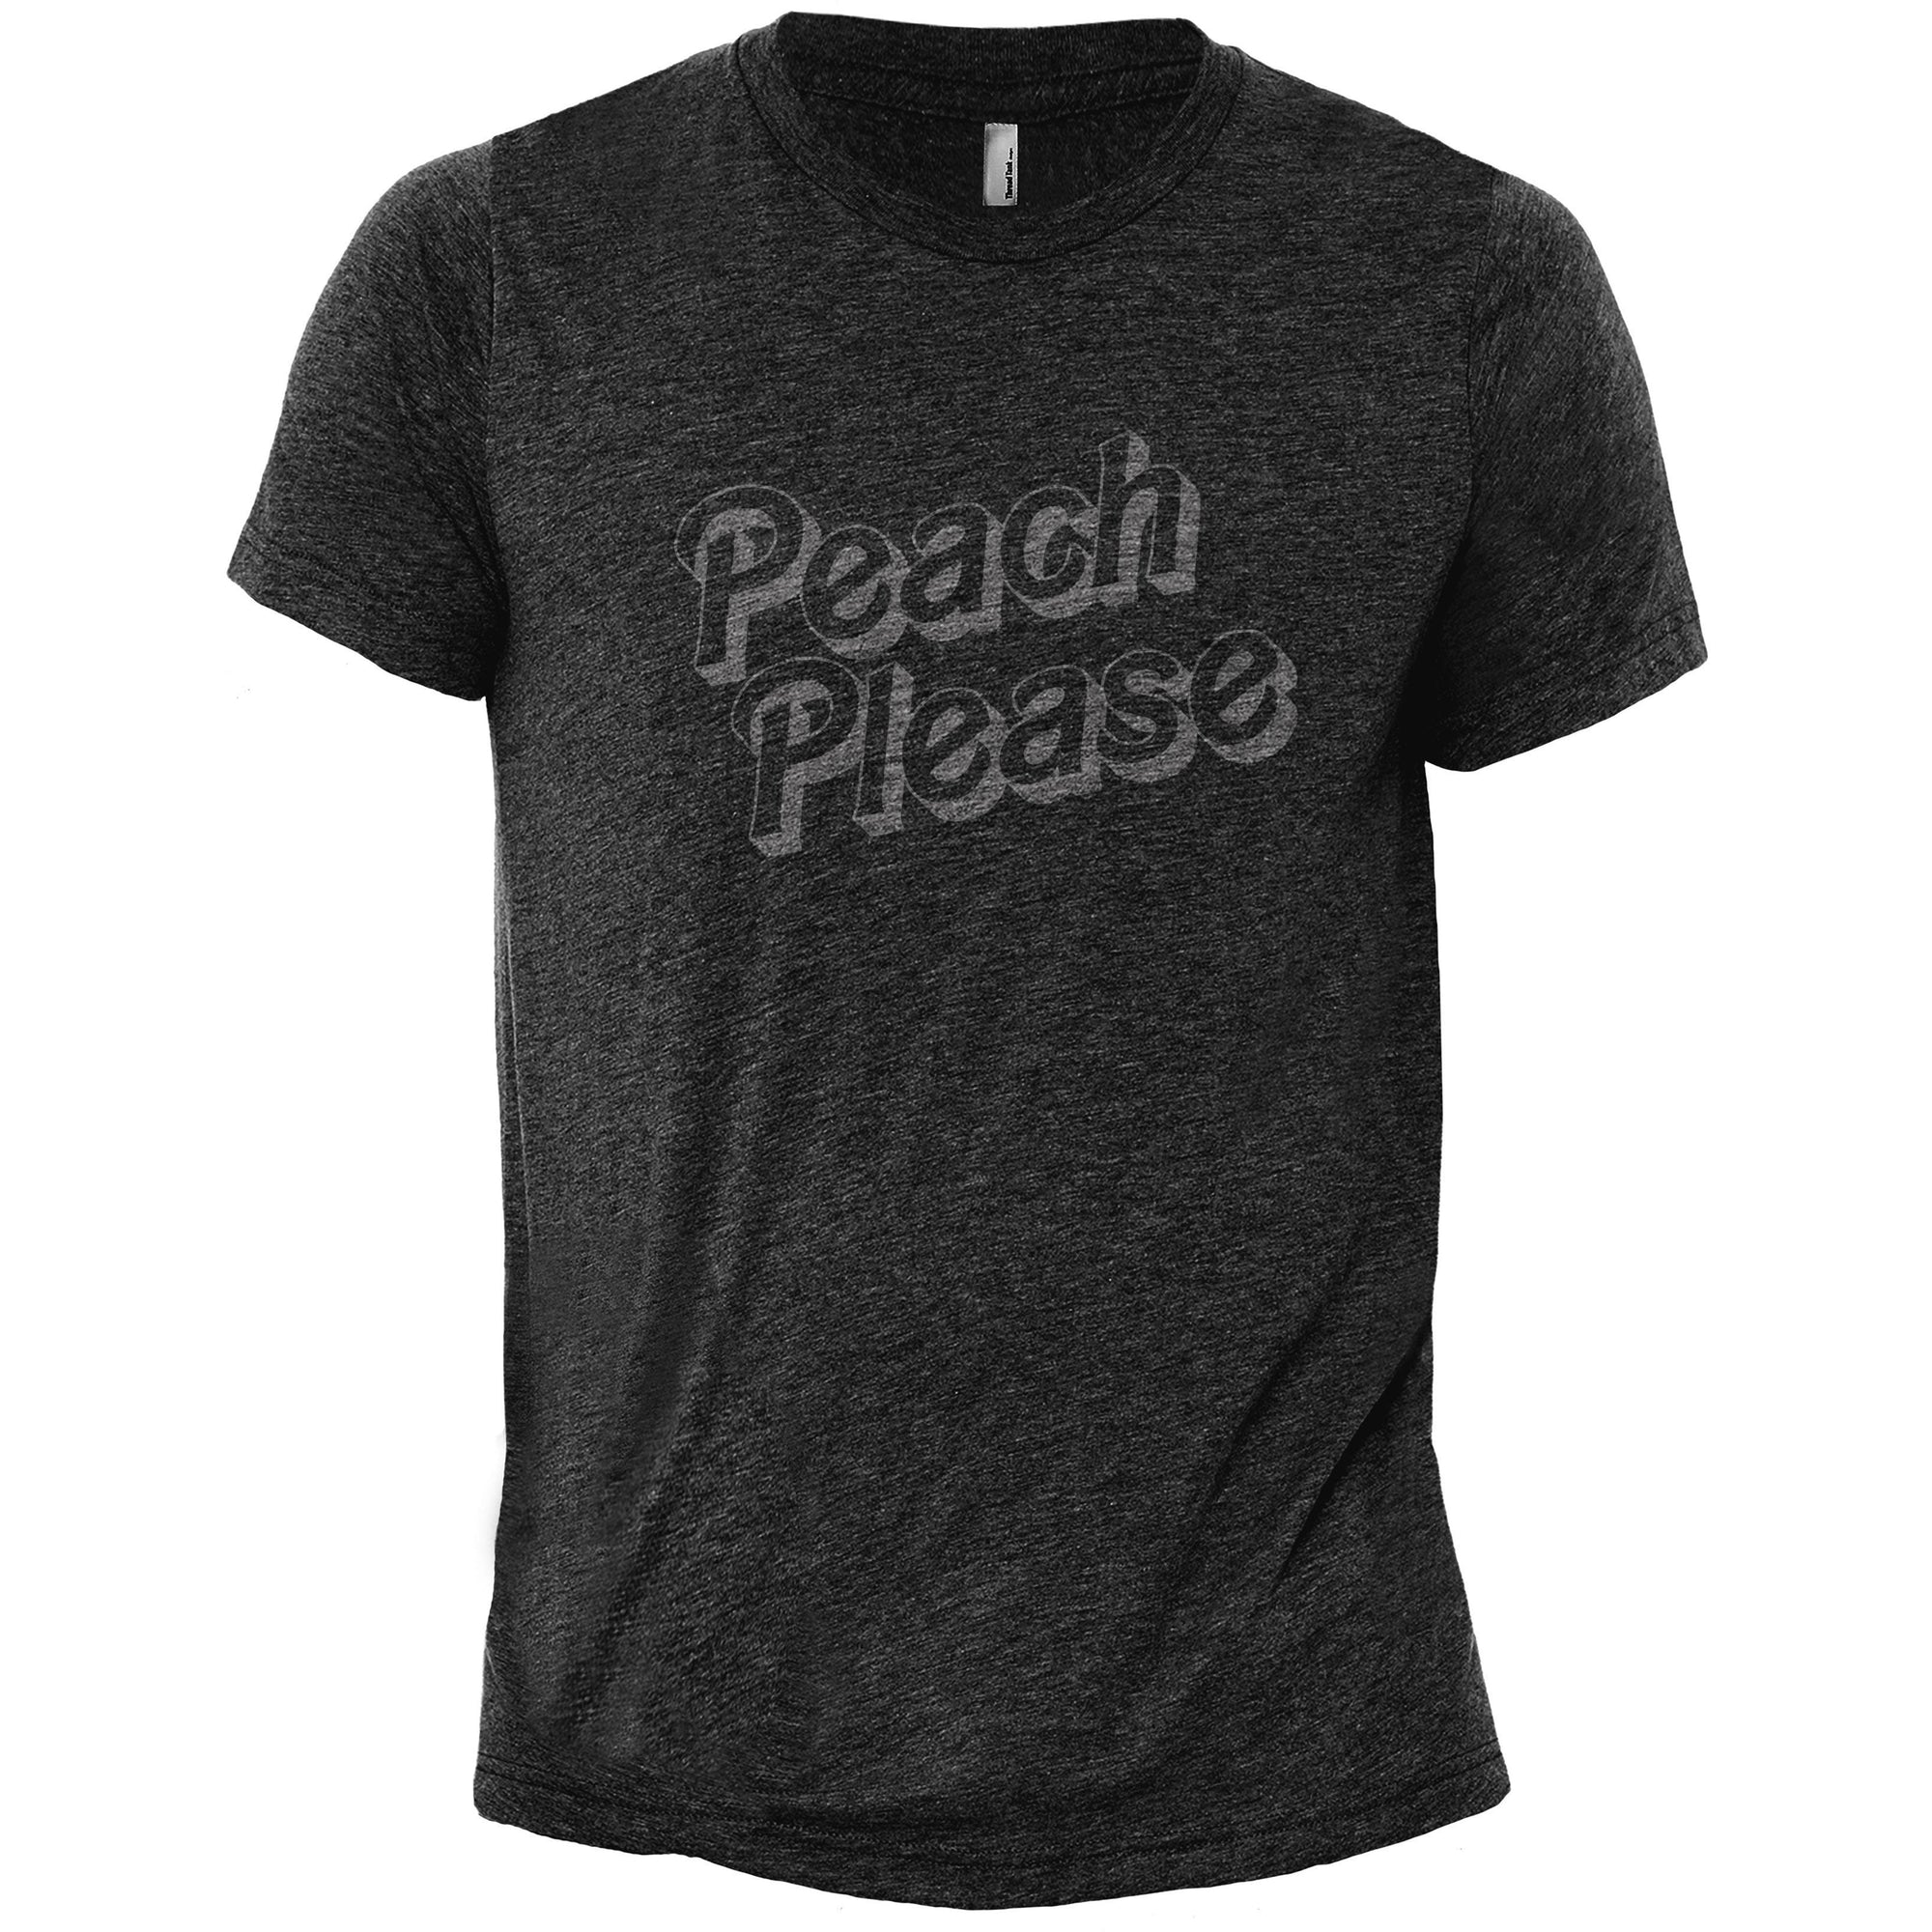 Peach, Please - Stories You Can Wear by Thread Tank